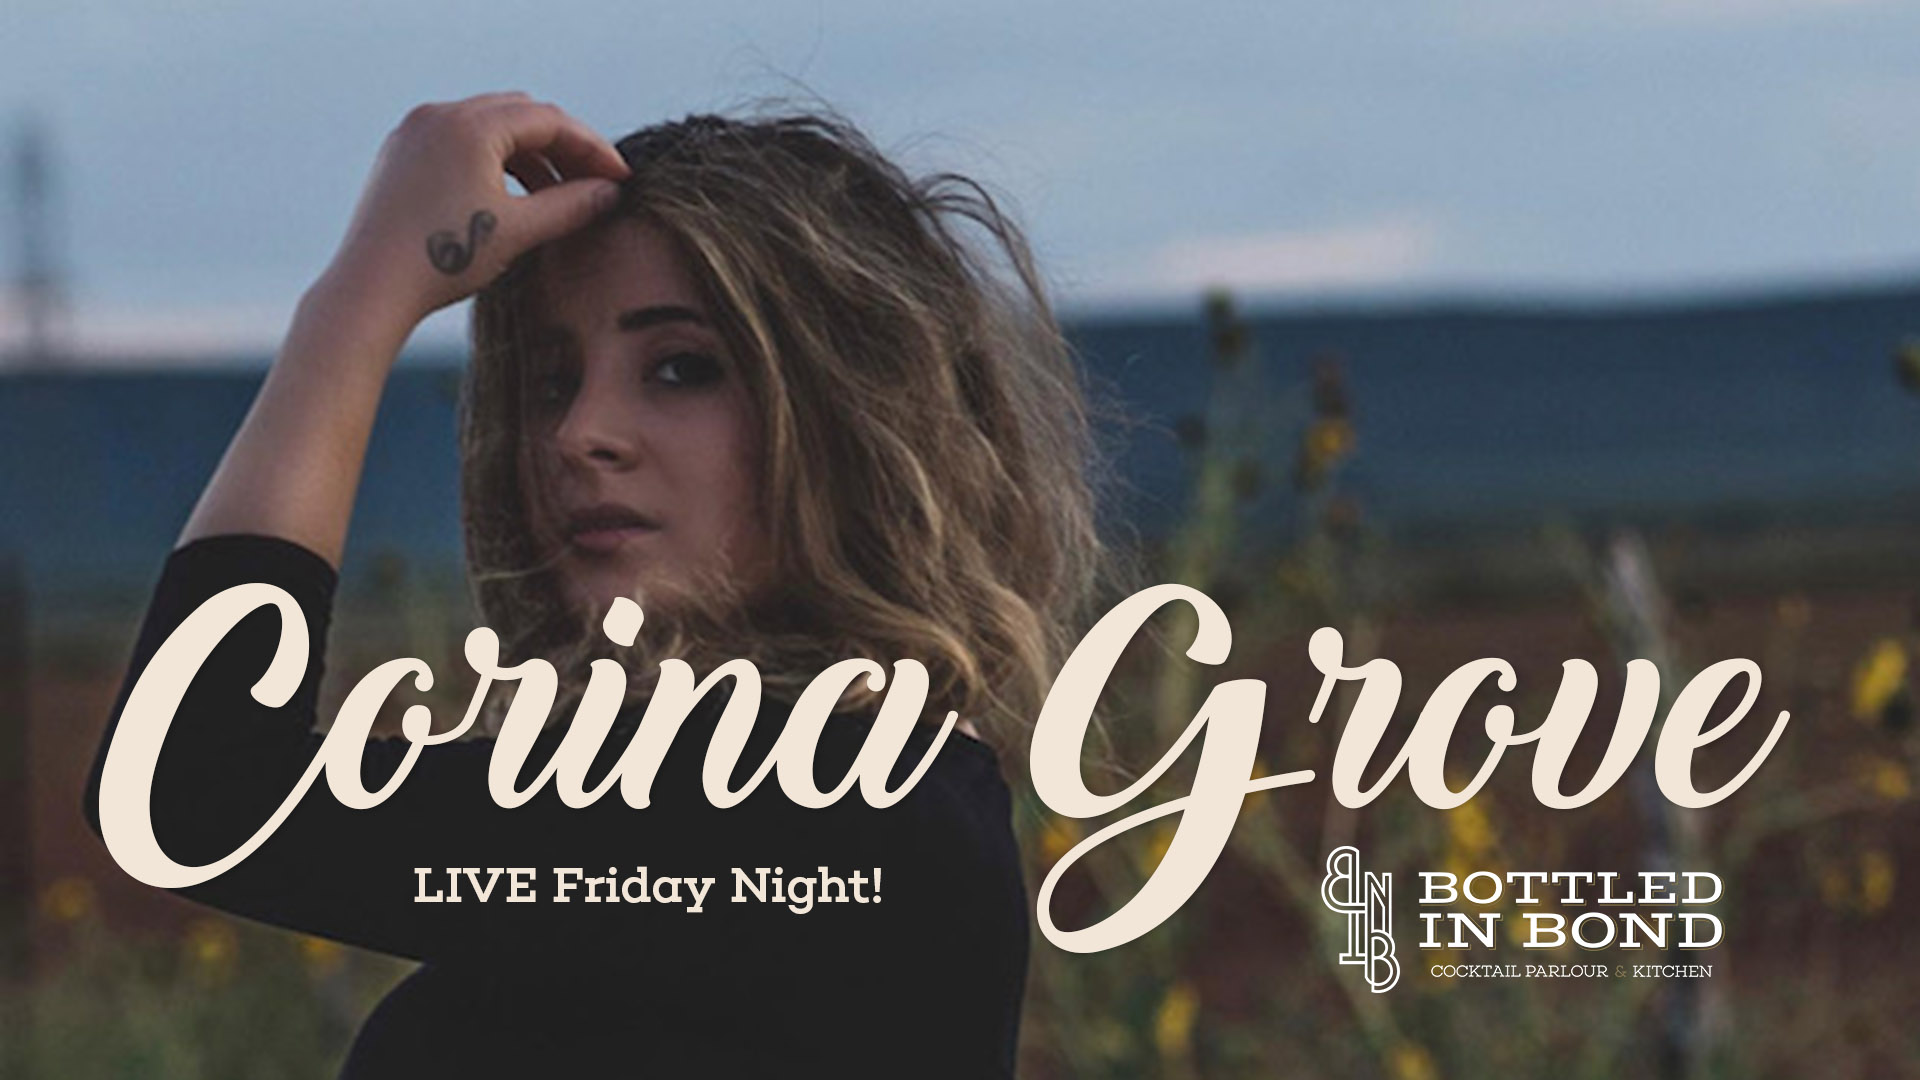 Talented Musical Artist Corina Grove will be performing LIVE on Friday at Bottled in Bond Cocktail Parlour and Kitchen